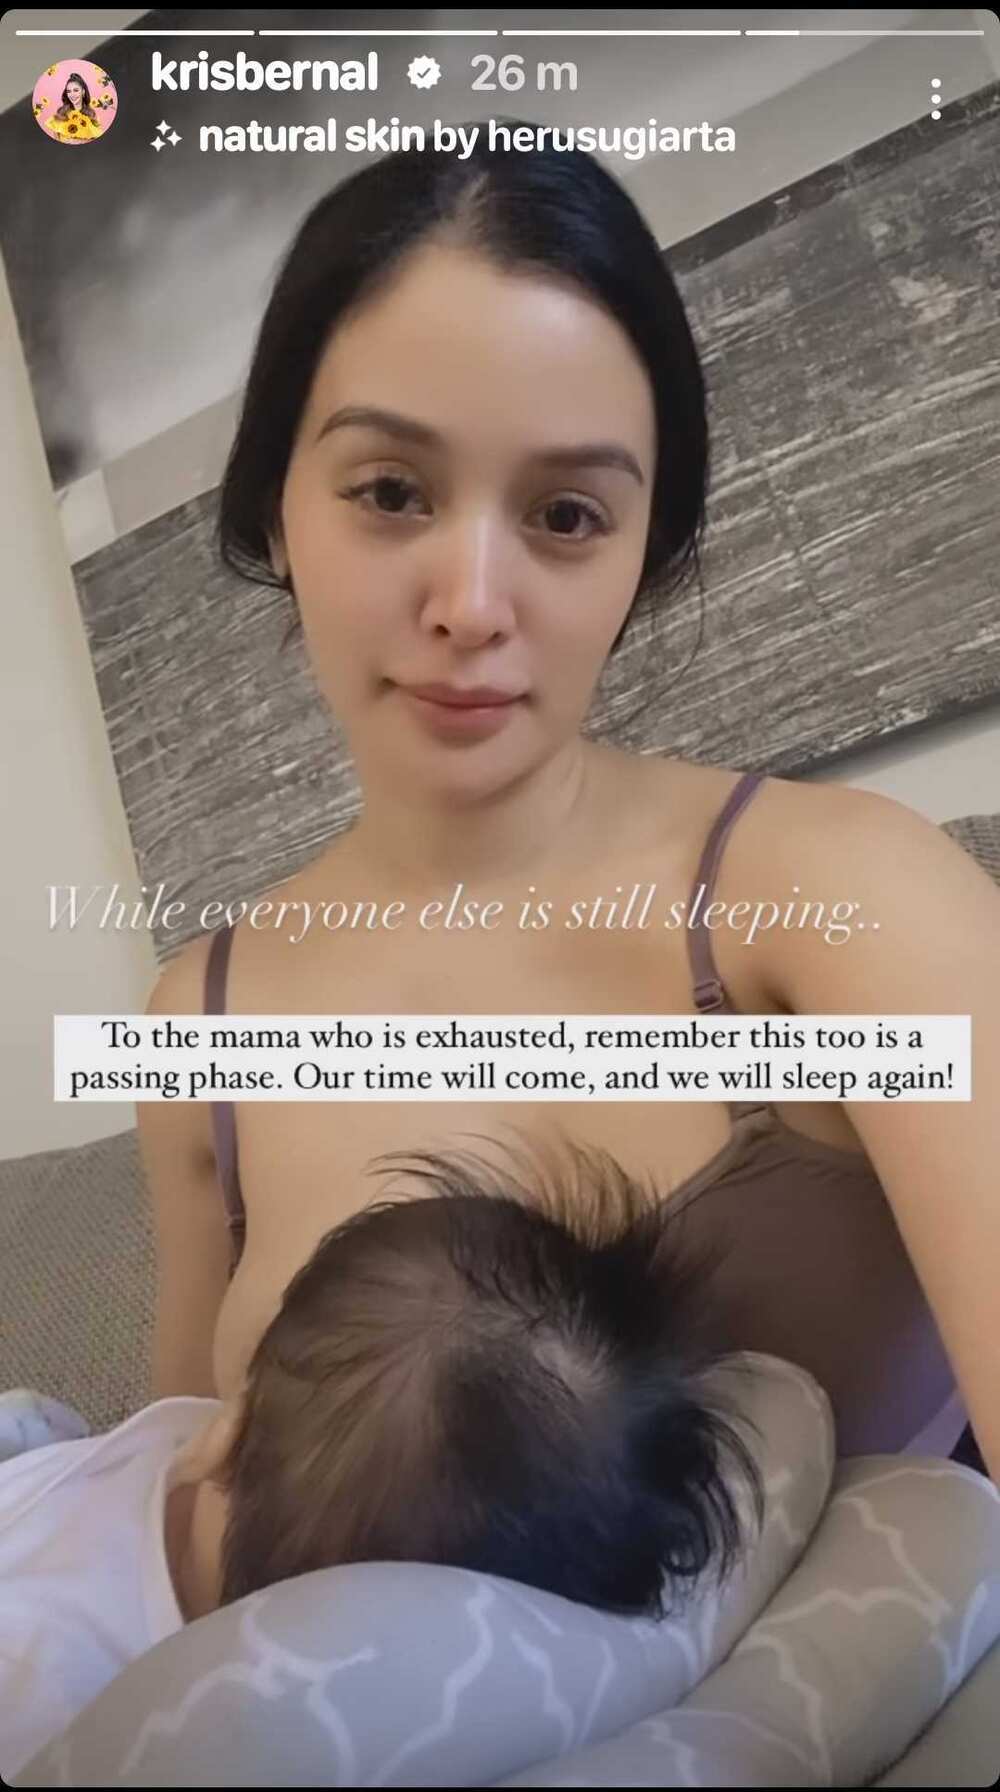 Kris Bernal writes optimistic post about taking care of infant